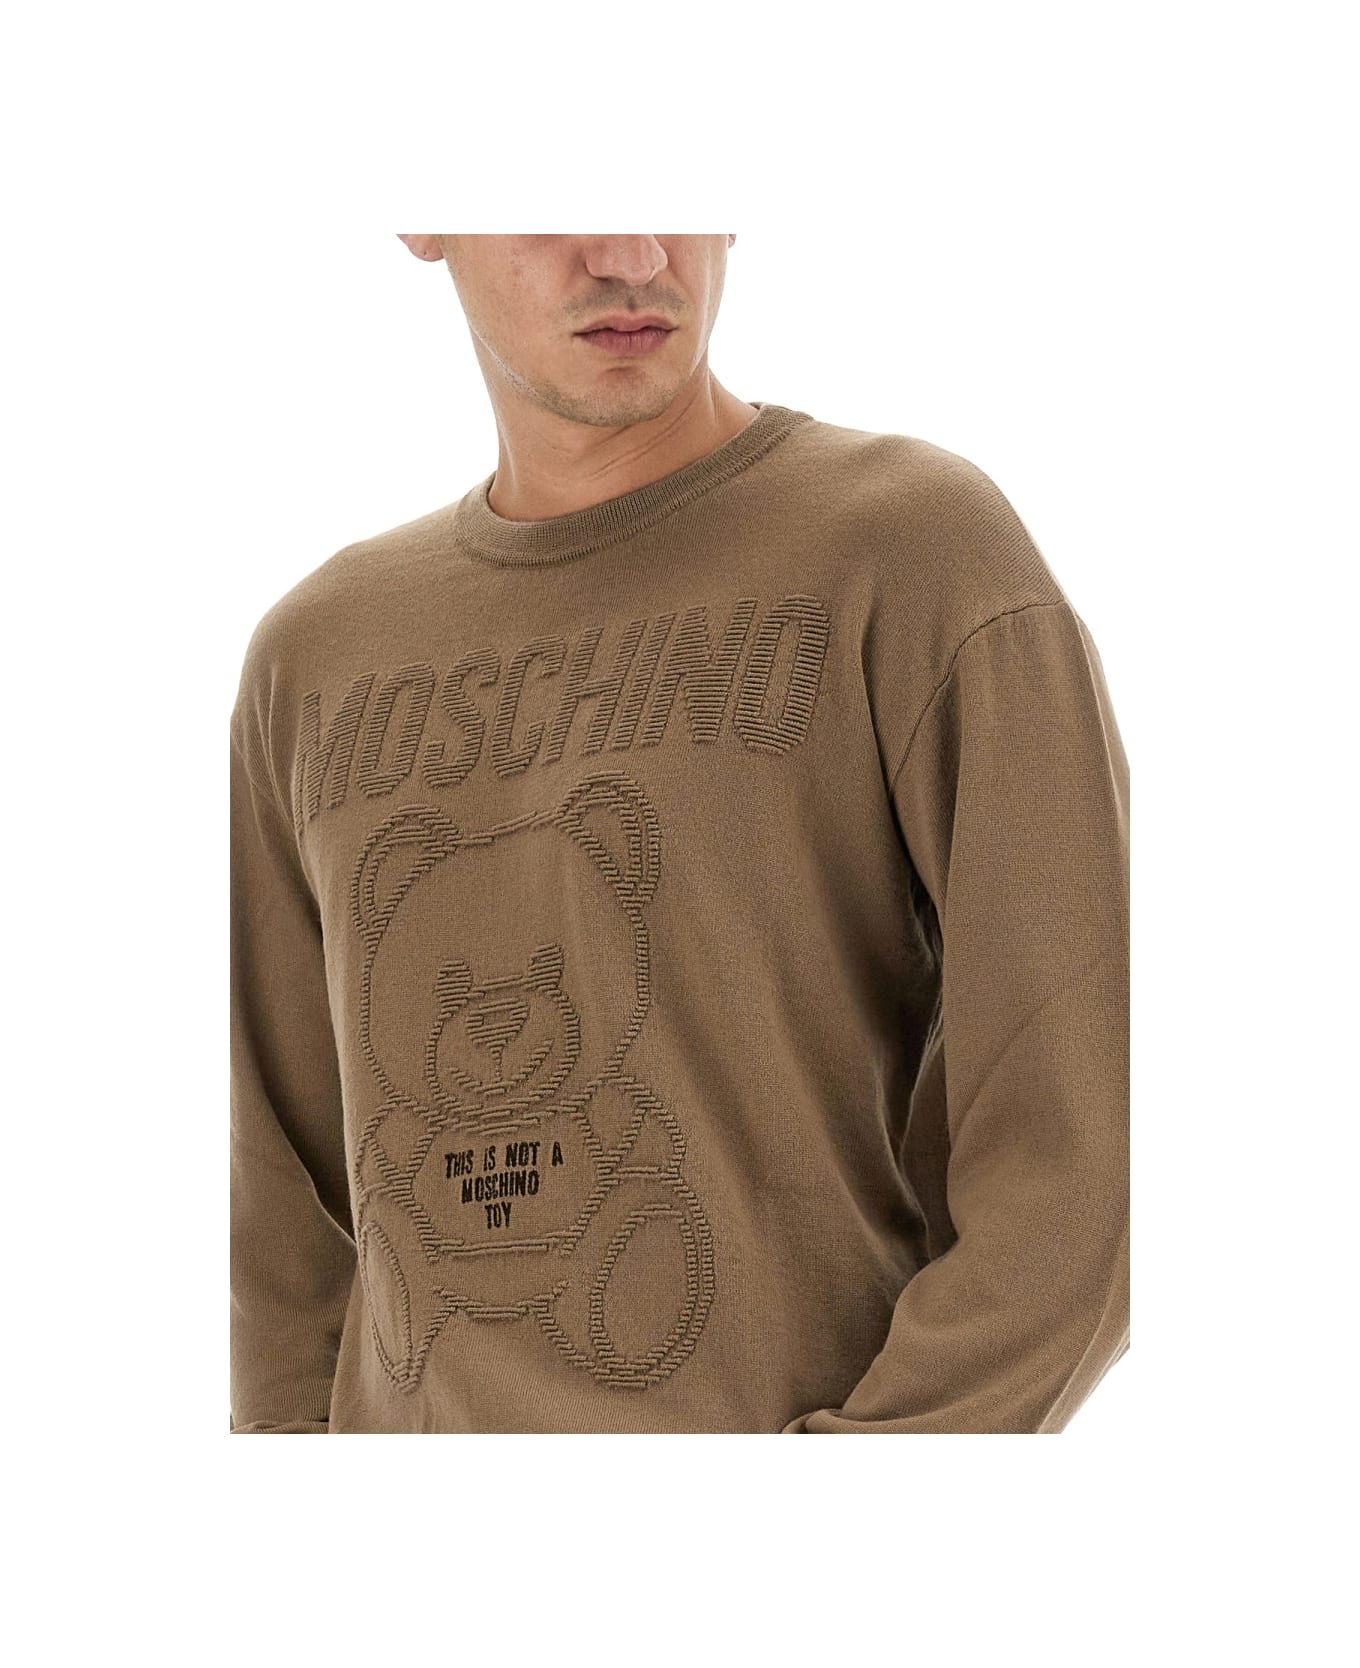 Moschino Jersey With Logo - BROWN